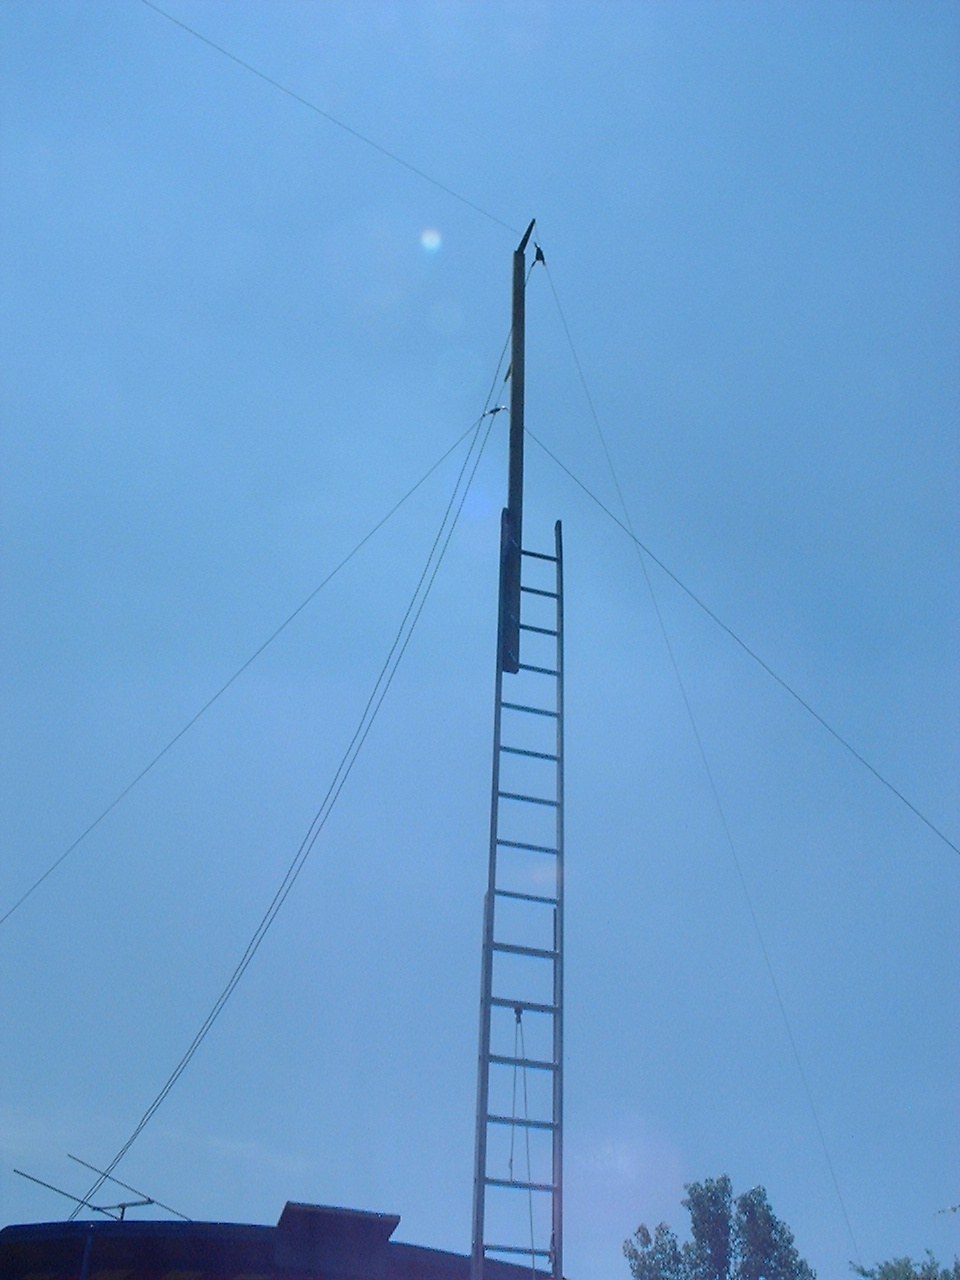 A close up of the dipoles.